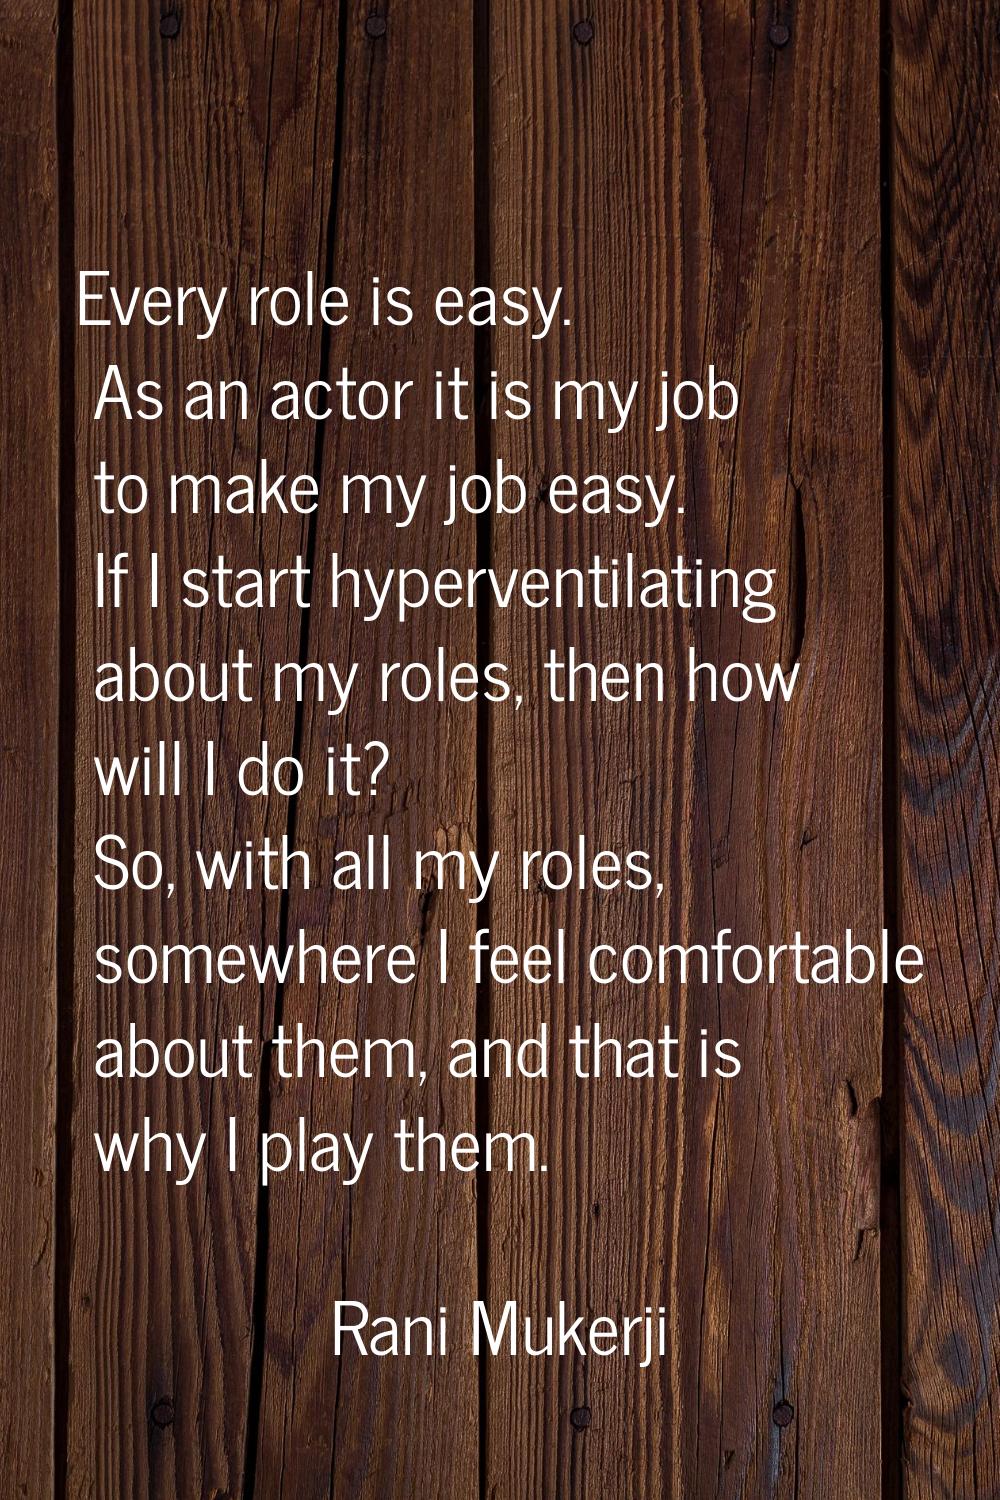 Every role is easy. As an actor it is my job to make my job easy. If I start hyperventilating about